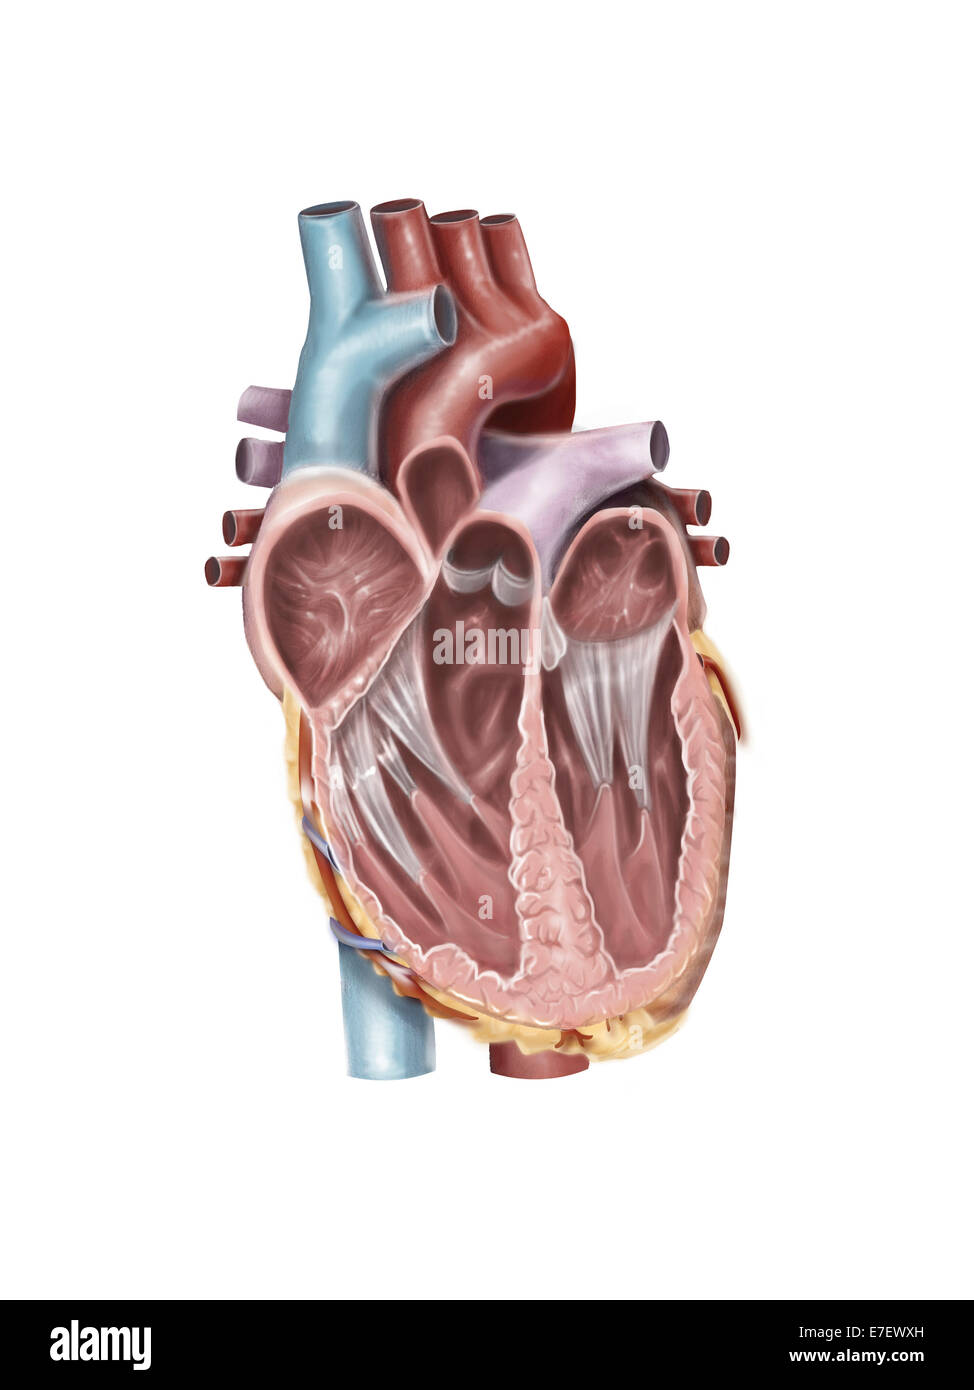 Internal view of the human heart. Stock Photo